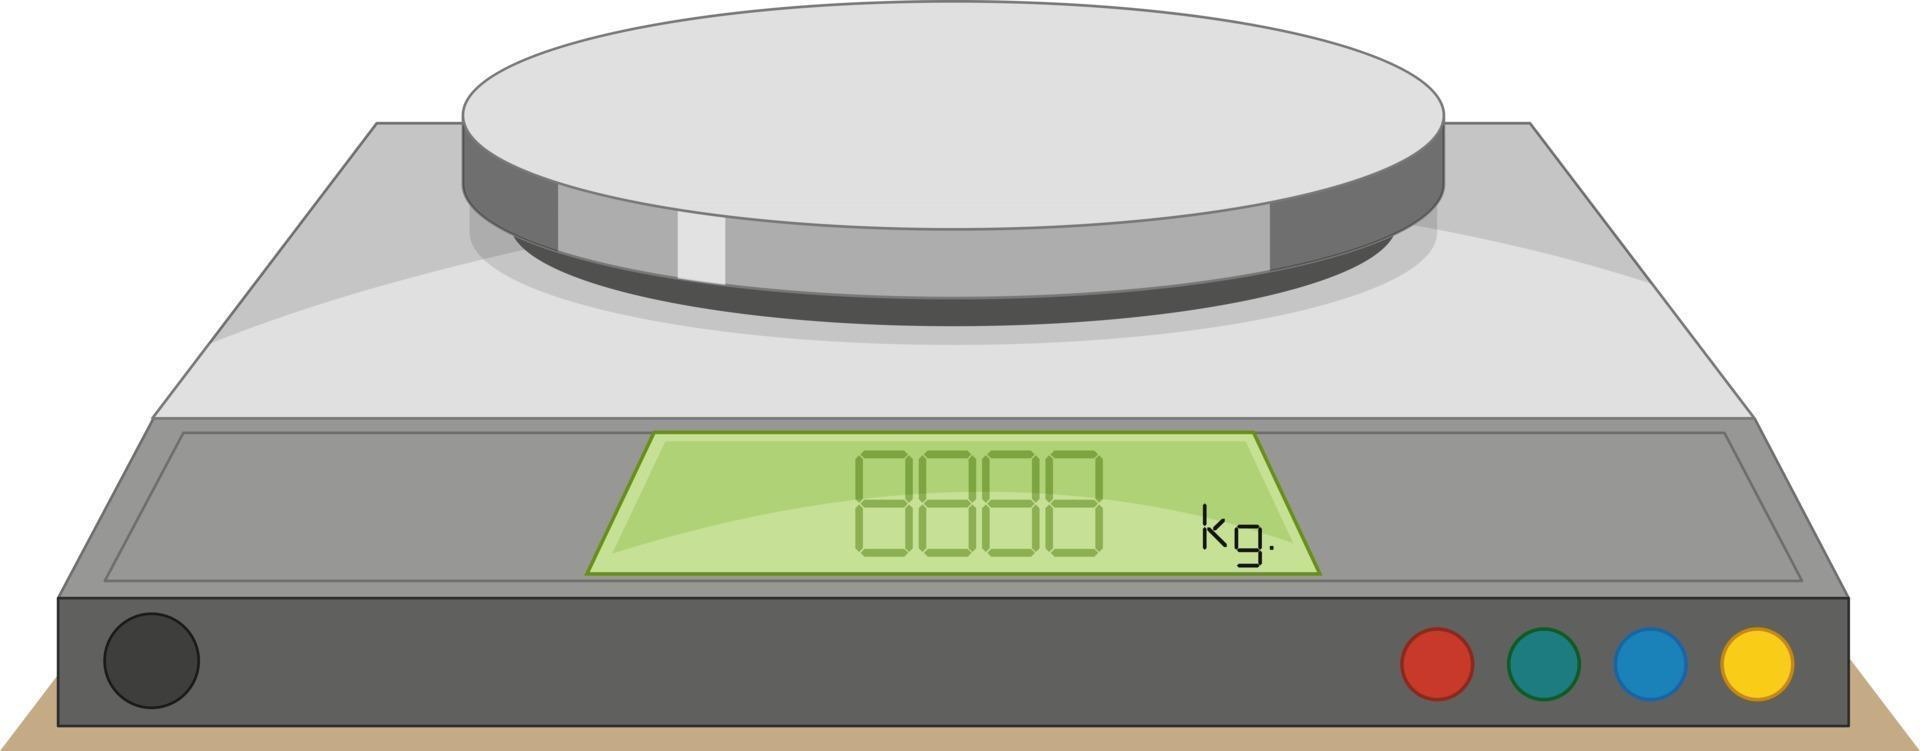 Digital weighing scale on a white background vector